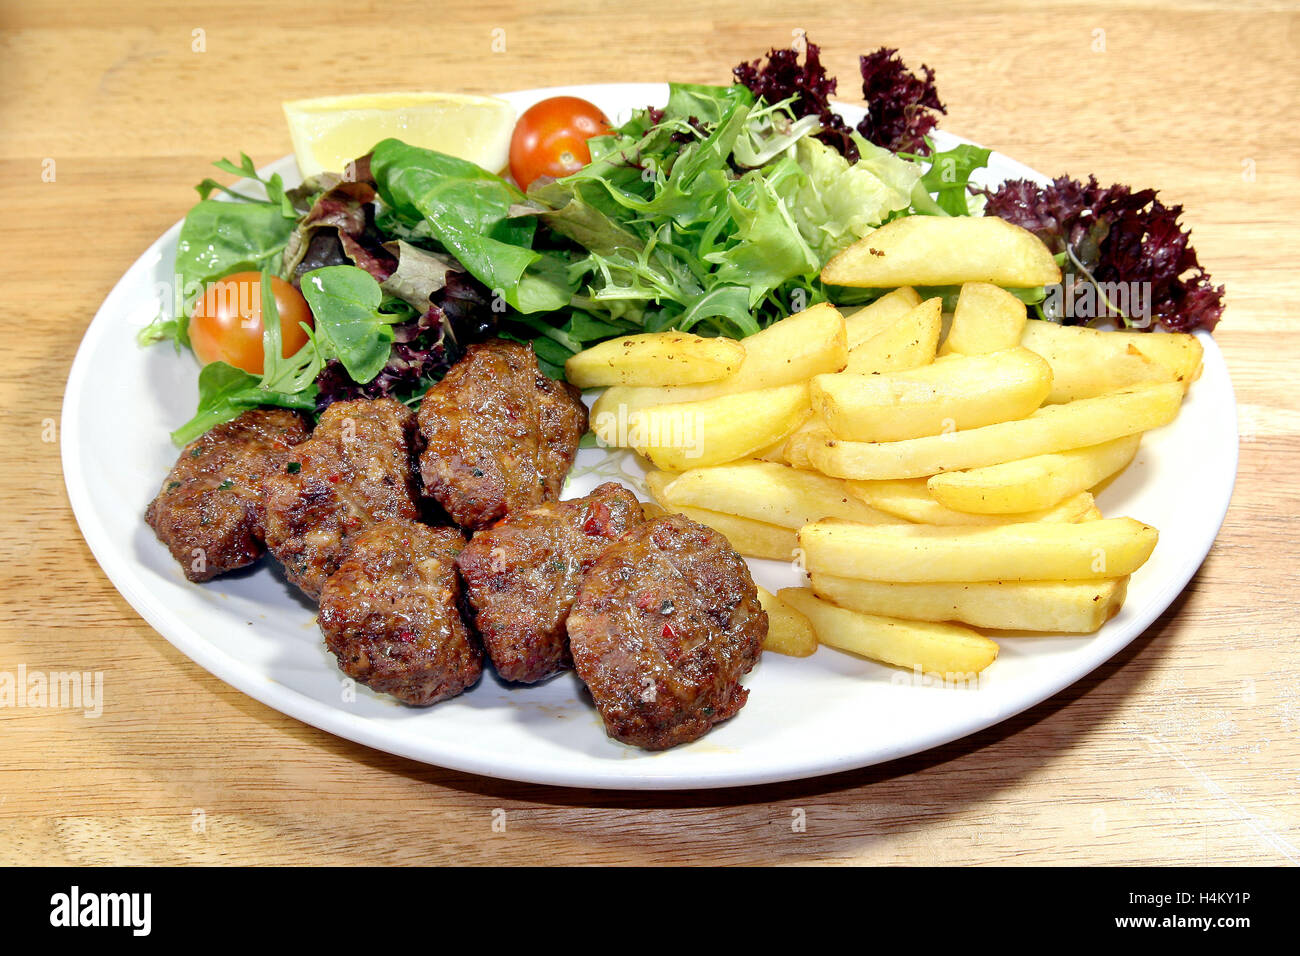 Grilled Beef Meatball served with fries and salad Stock Photo